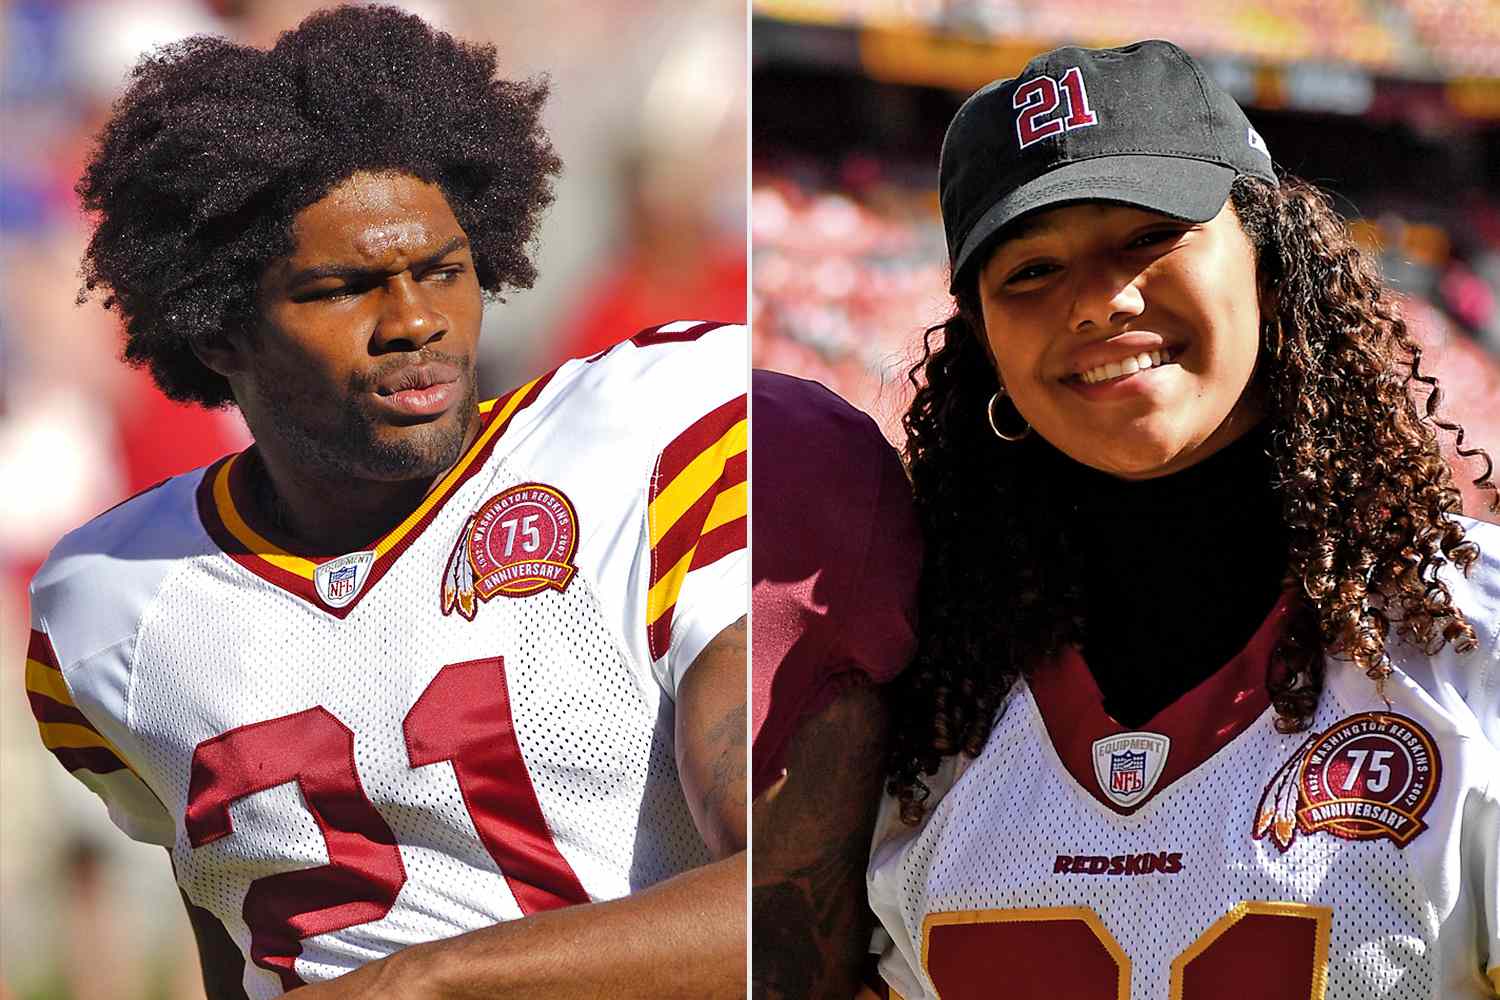 In a Stunning announcement, Jackie Taylor, the daughter of Ex-Washington Commanders’ star, Announces Departure from WNBA after honoring Sean Taylor’s Legacy.